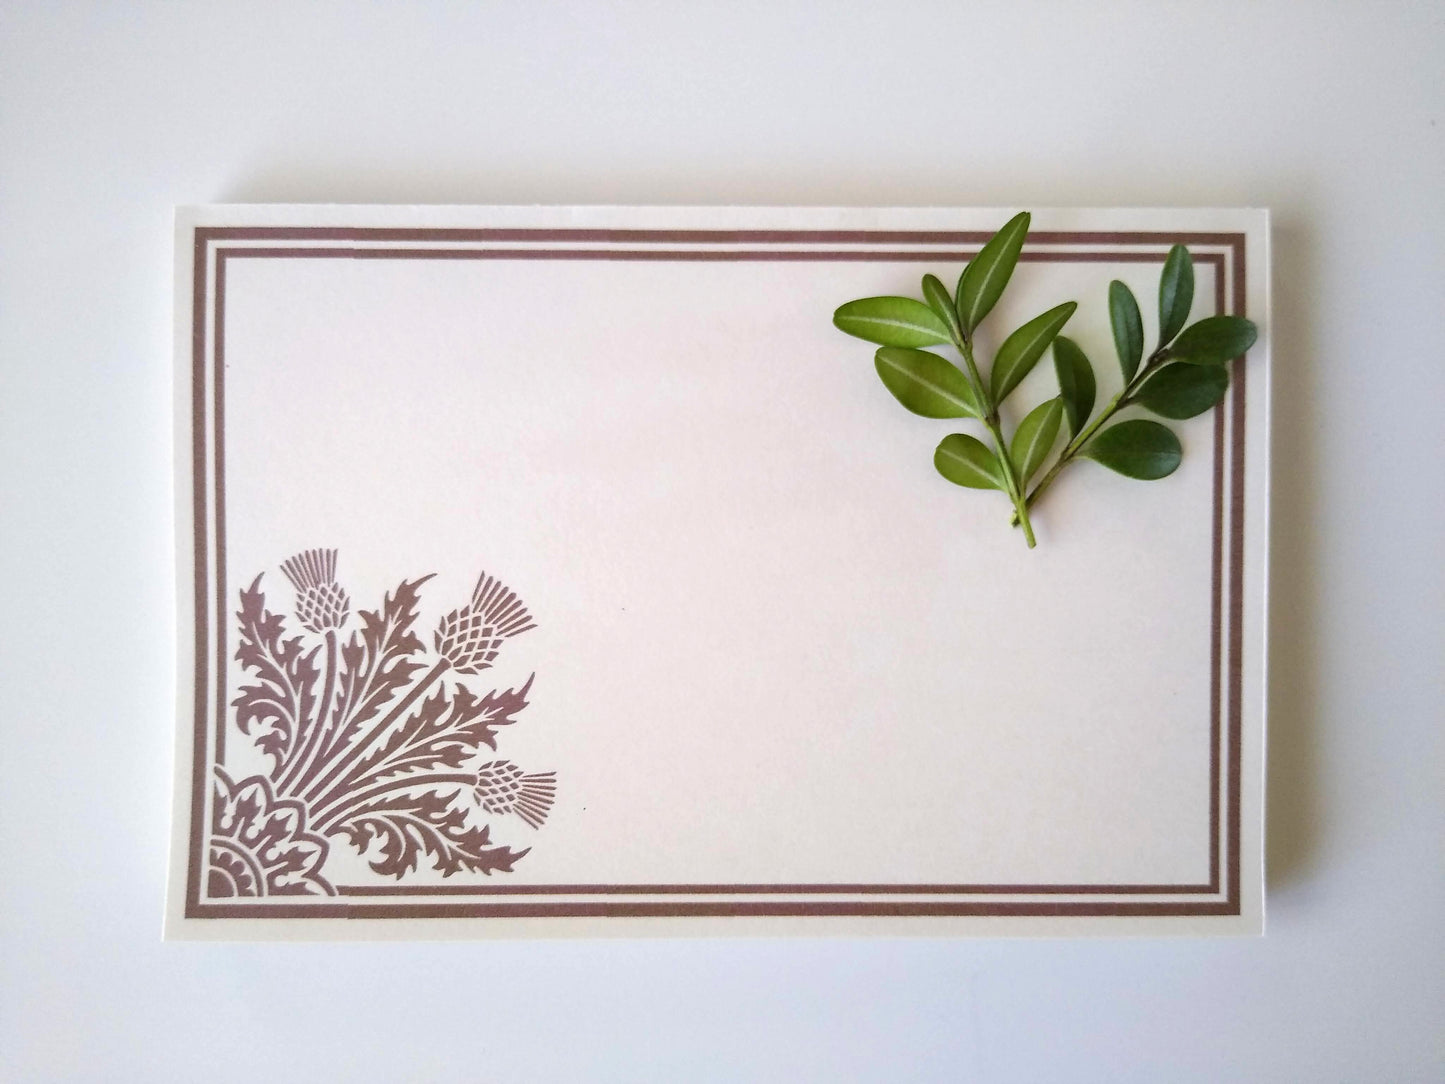 Single notepad with a stylized thistle design in the lower left corner. There is a double line border around the whole notepad. Two small sprigs of leaves rest on the upper right hand corner.